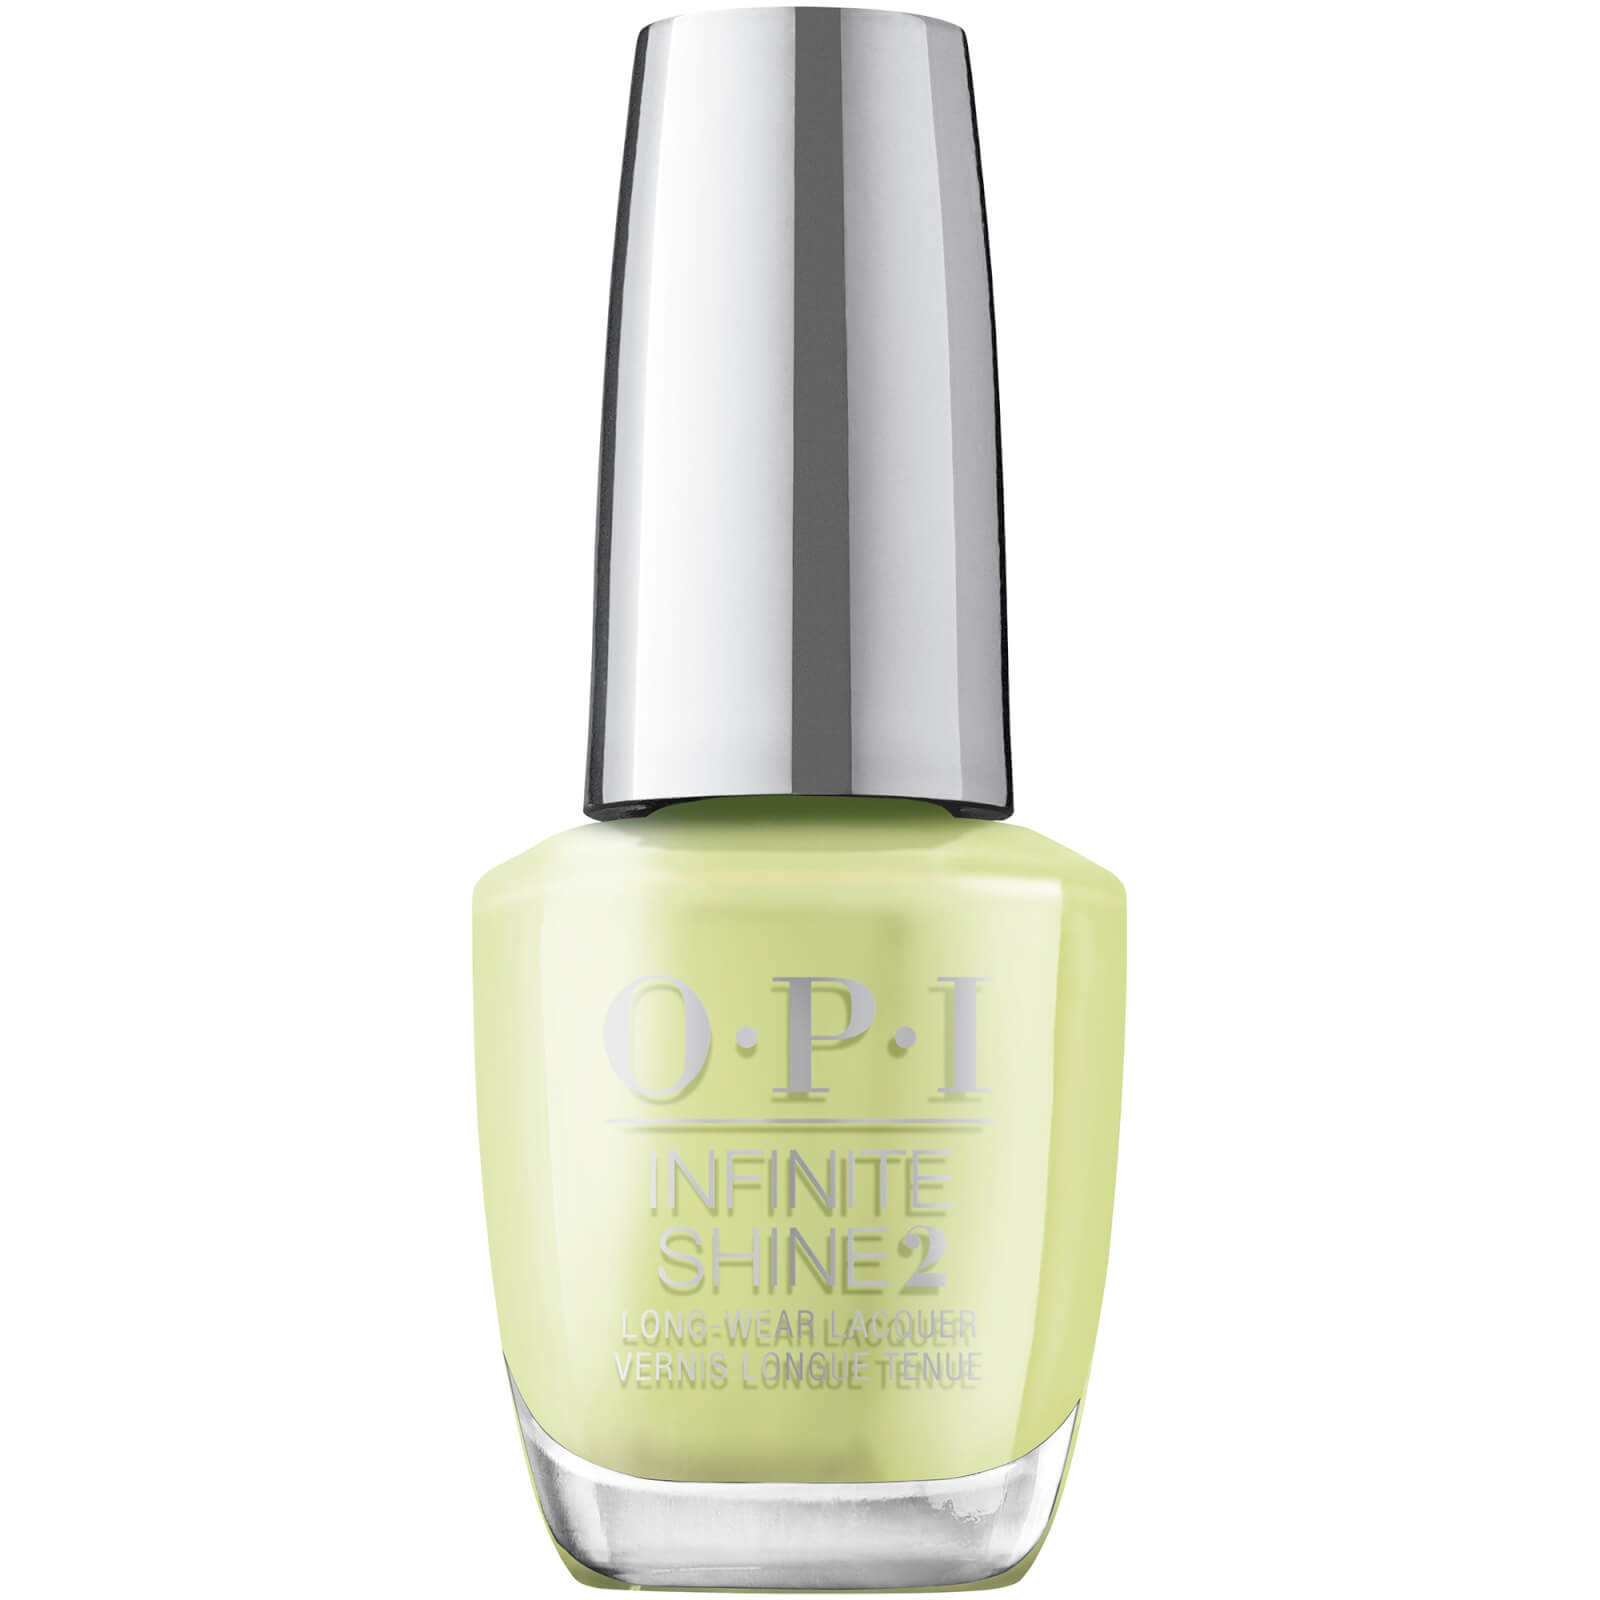 Opi Me, Myself And  Infinite Shine Long-wear Nail Polish 15ml (various Shades) - Clear Your Cash In Green